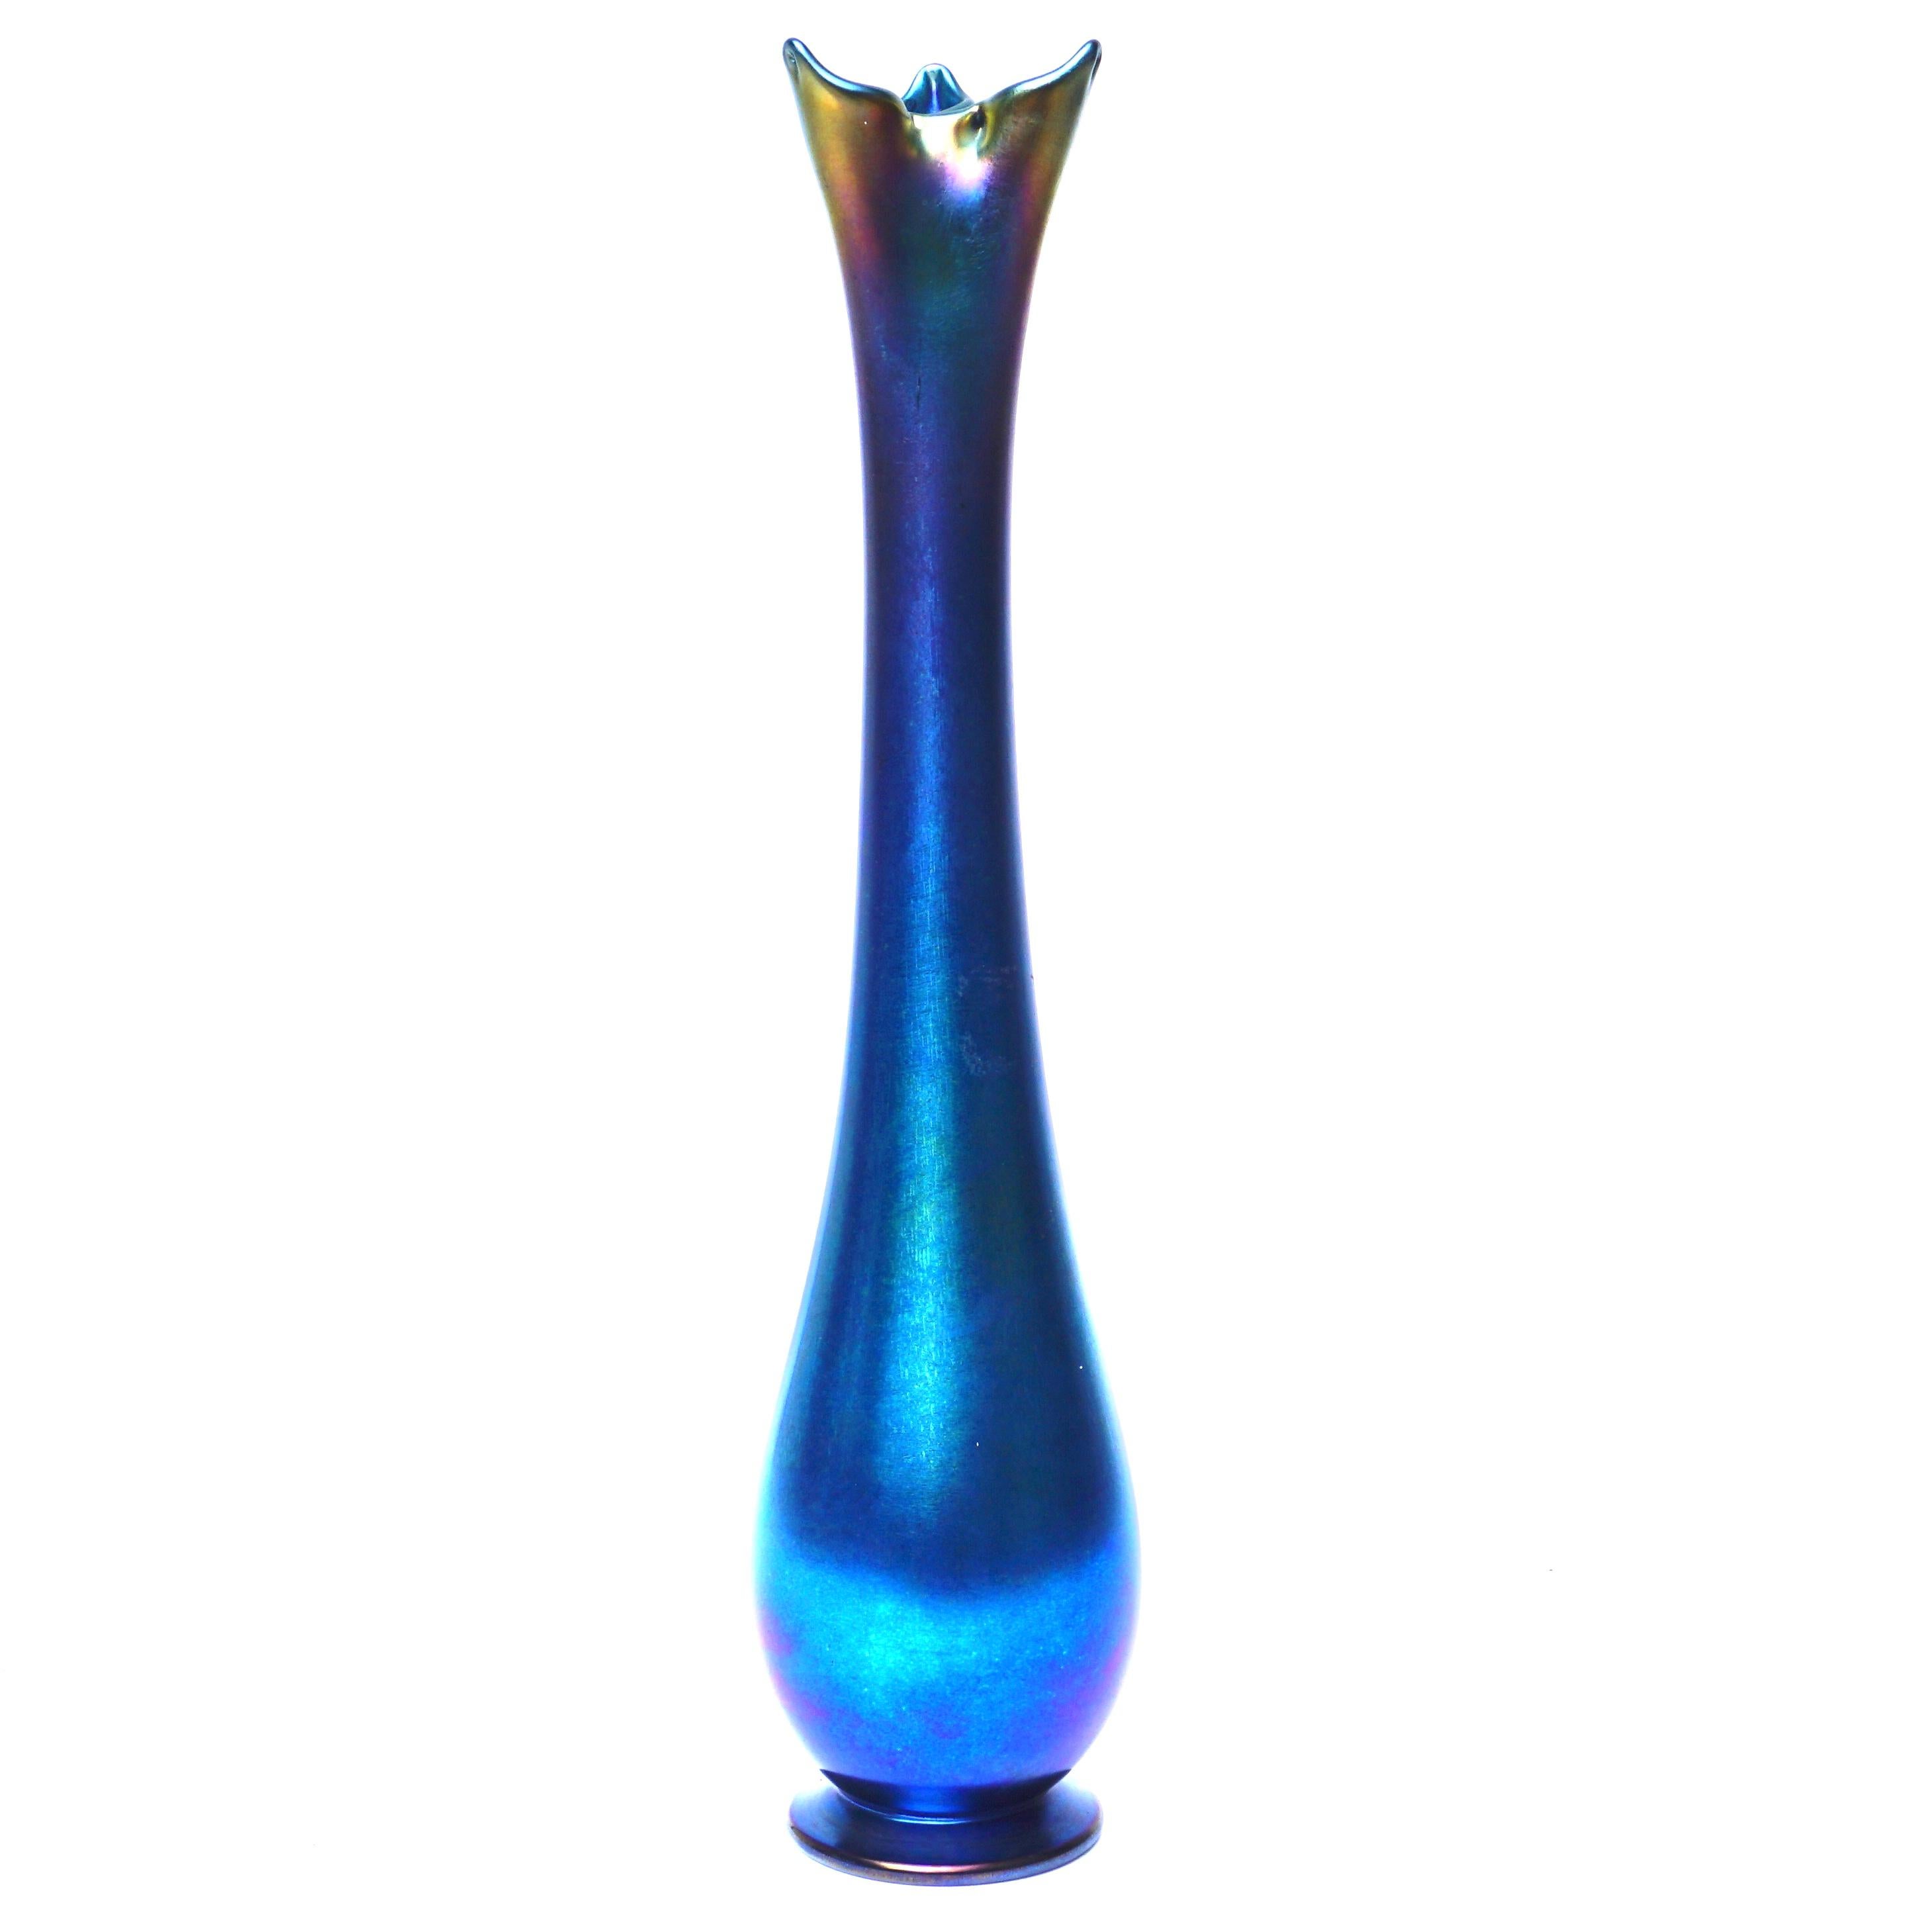 LCT Favrile Vase. Tiffany studios, New York, #5935D. 

Description: WOW! More beautiful than the photos if you can believe it. Tiffany made one blue vase to every 75 gold Favrile pieces. Rare and beautiful. Amazing deep iridescence of many blues,